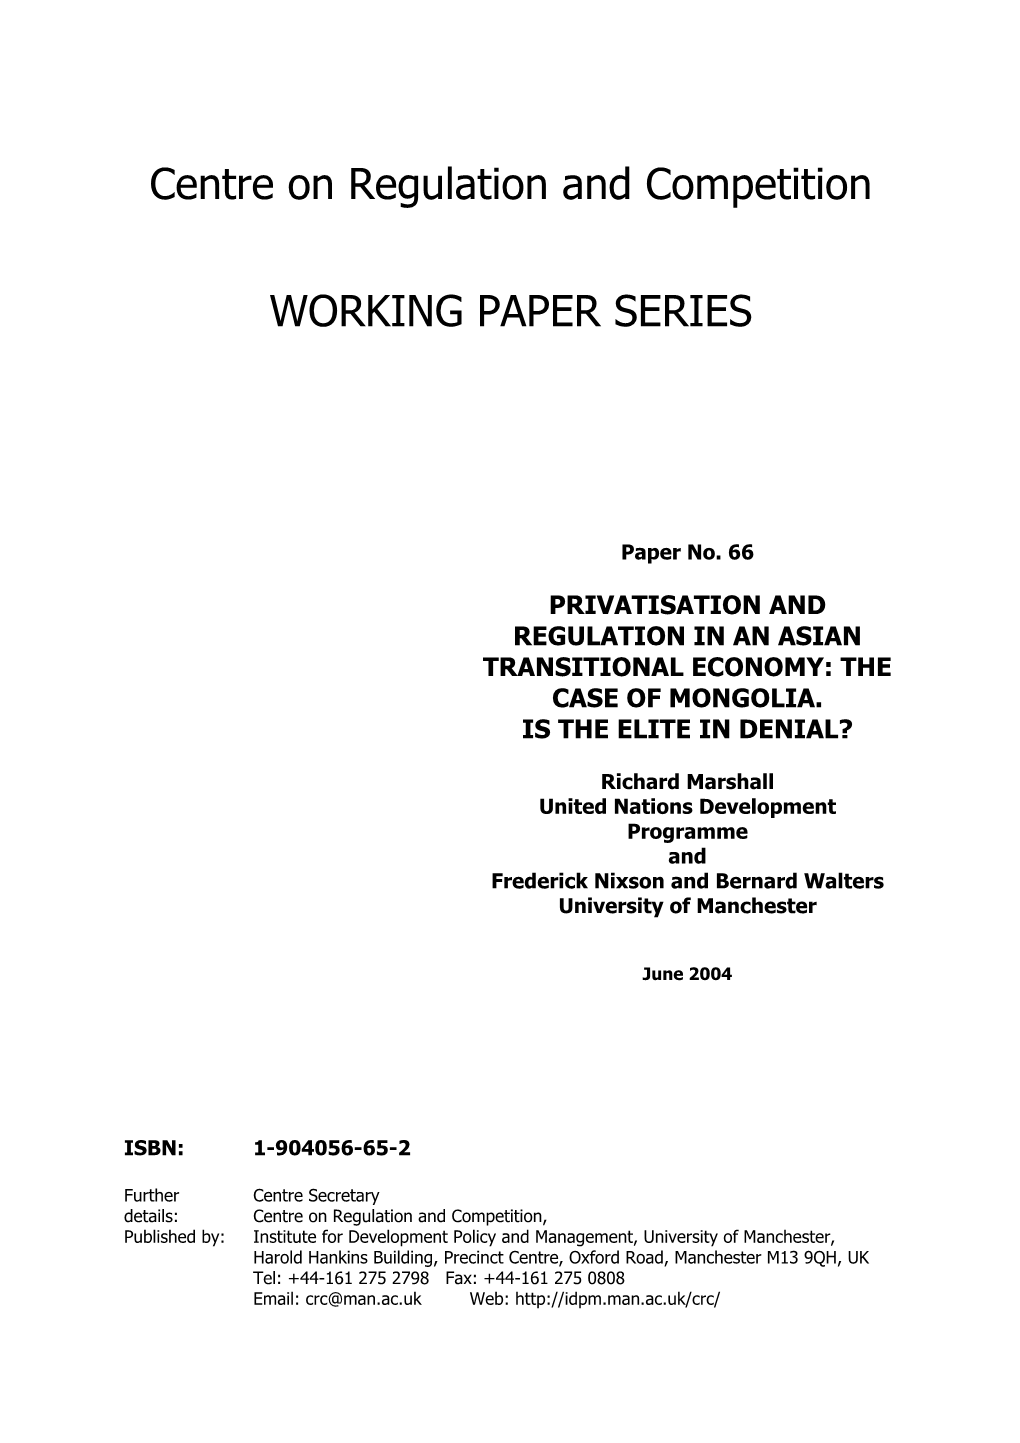 Privatisation and Regulation in an Asian Transitional